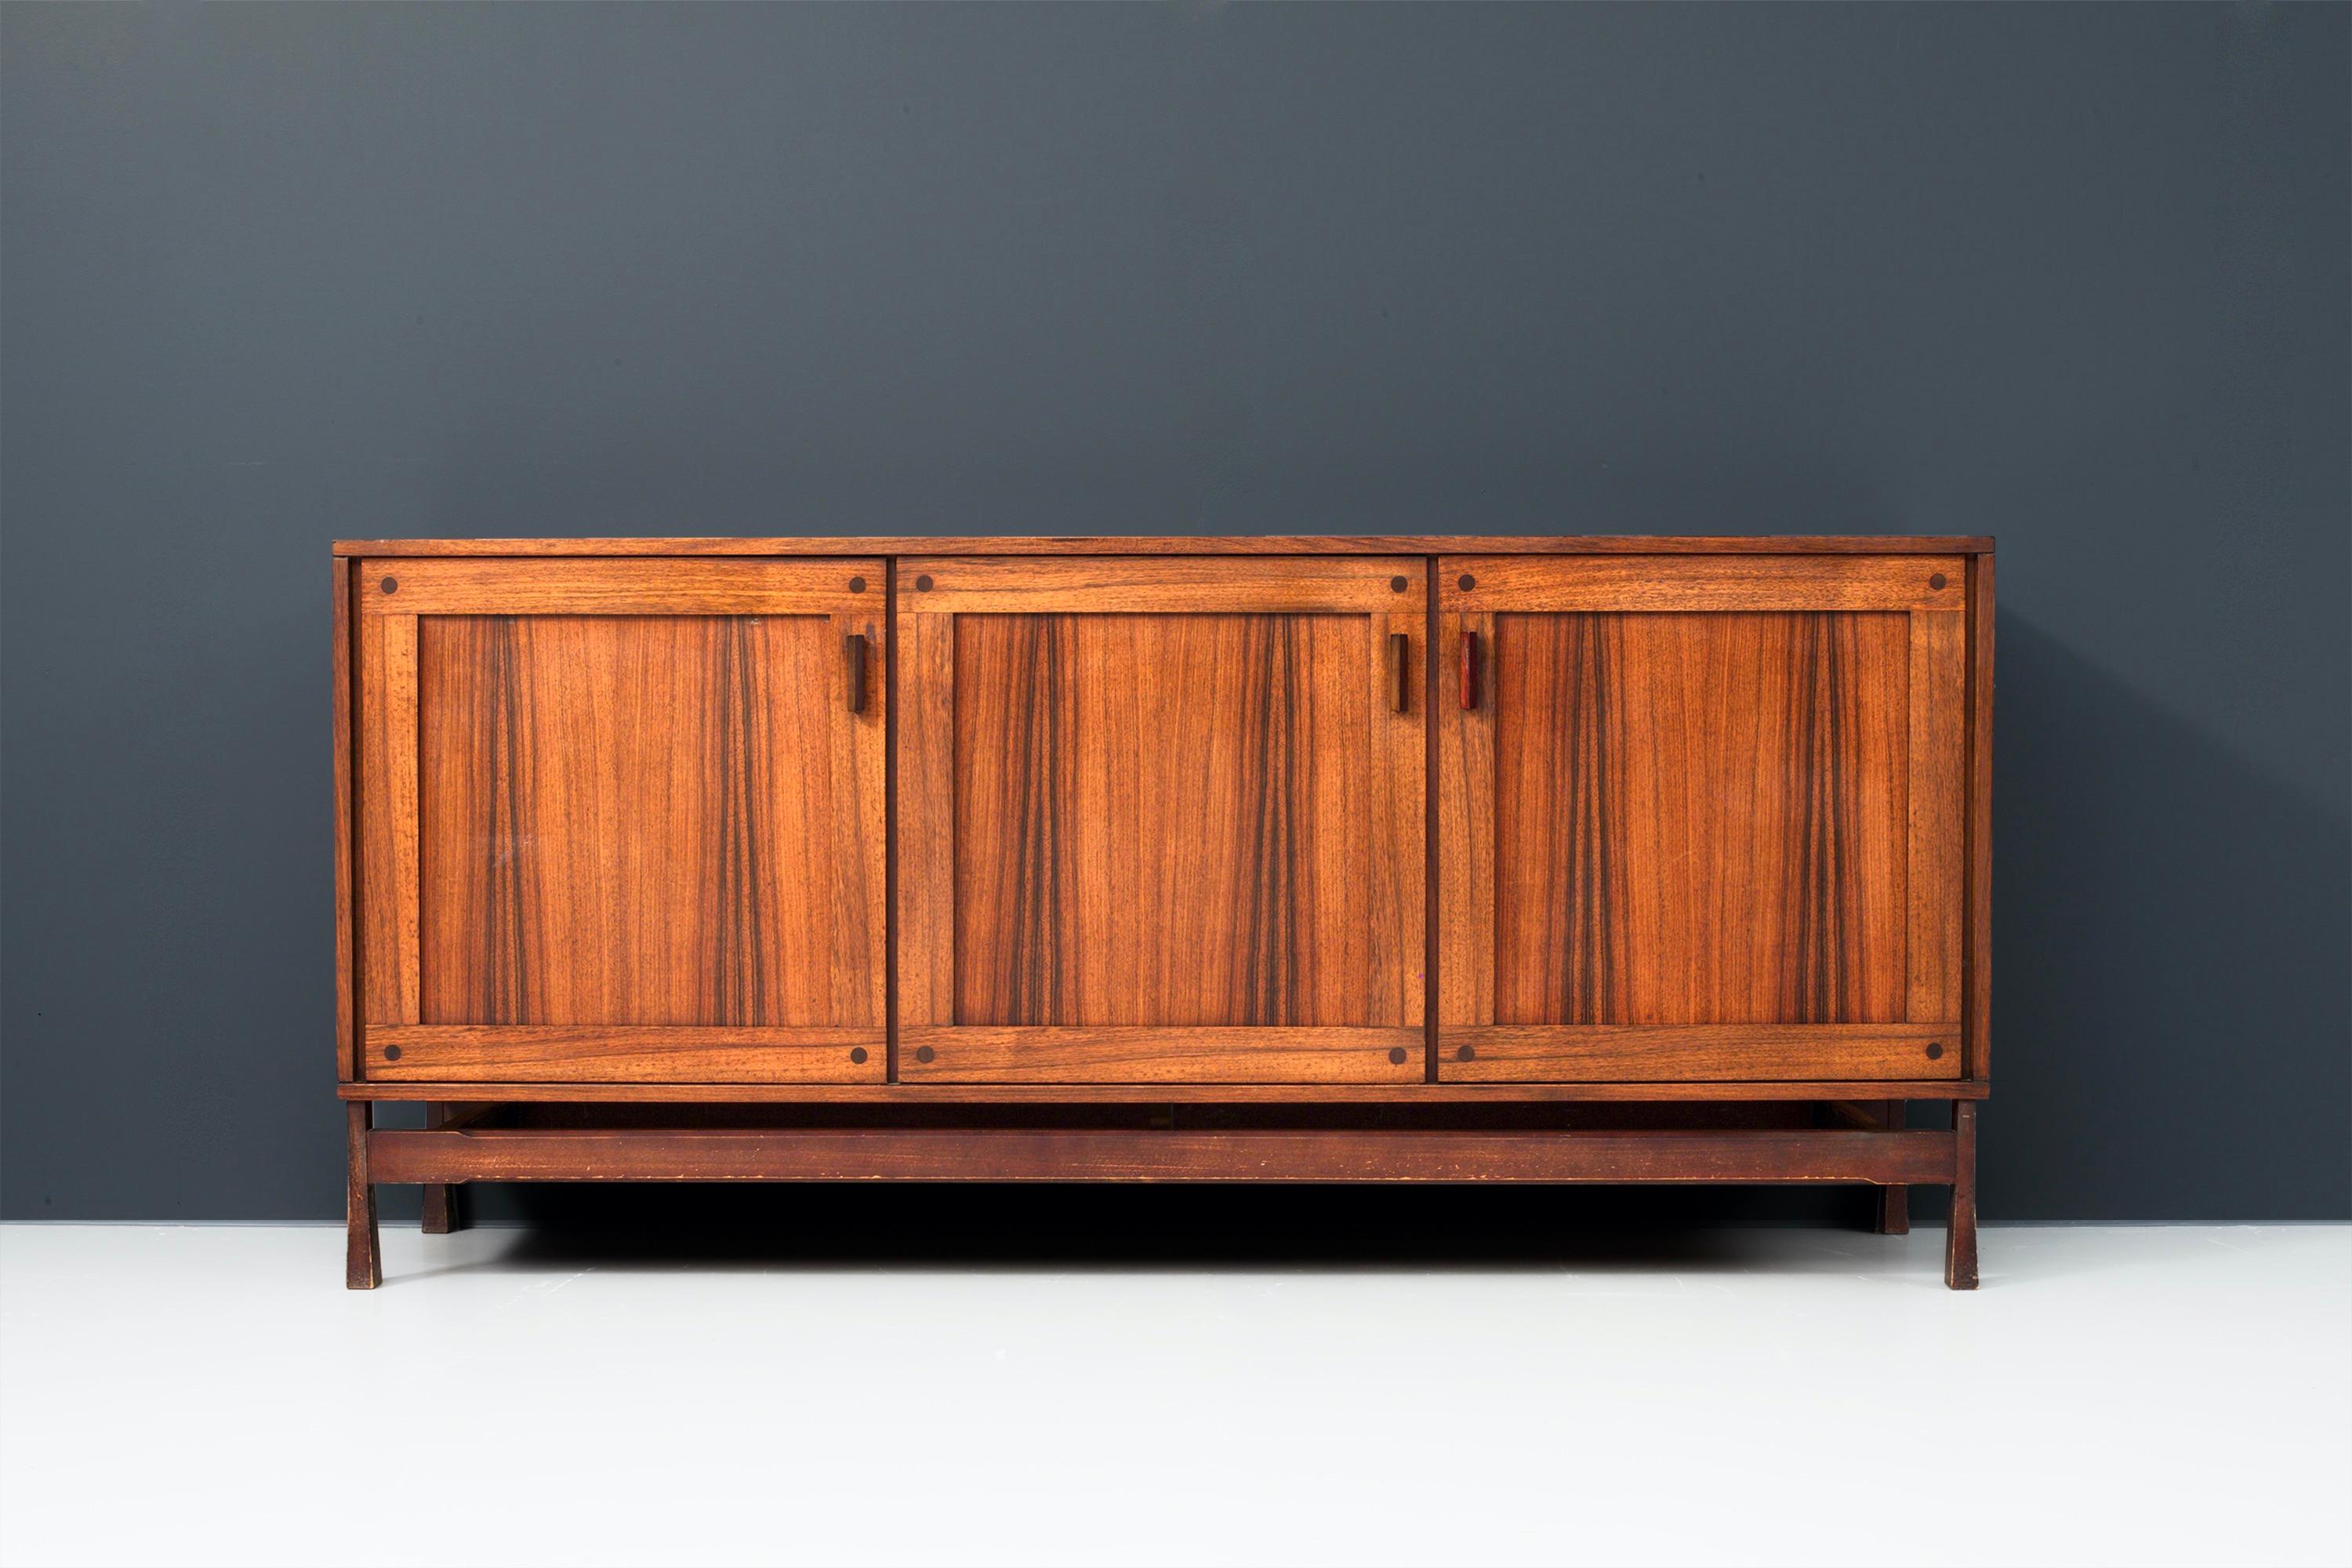 This sturdy three-door Italian credenza is in very good condition and has well balanced proportions. The wood of the top, doors and sides have dark, dynamic, almost dancing flames.
The door handles and drawer openings are geometrical shaped and